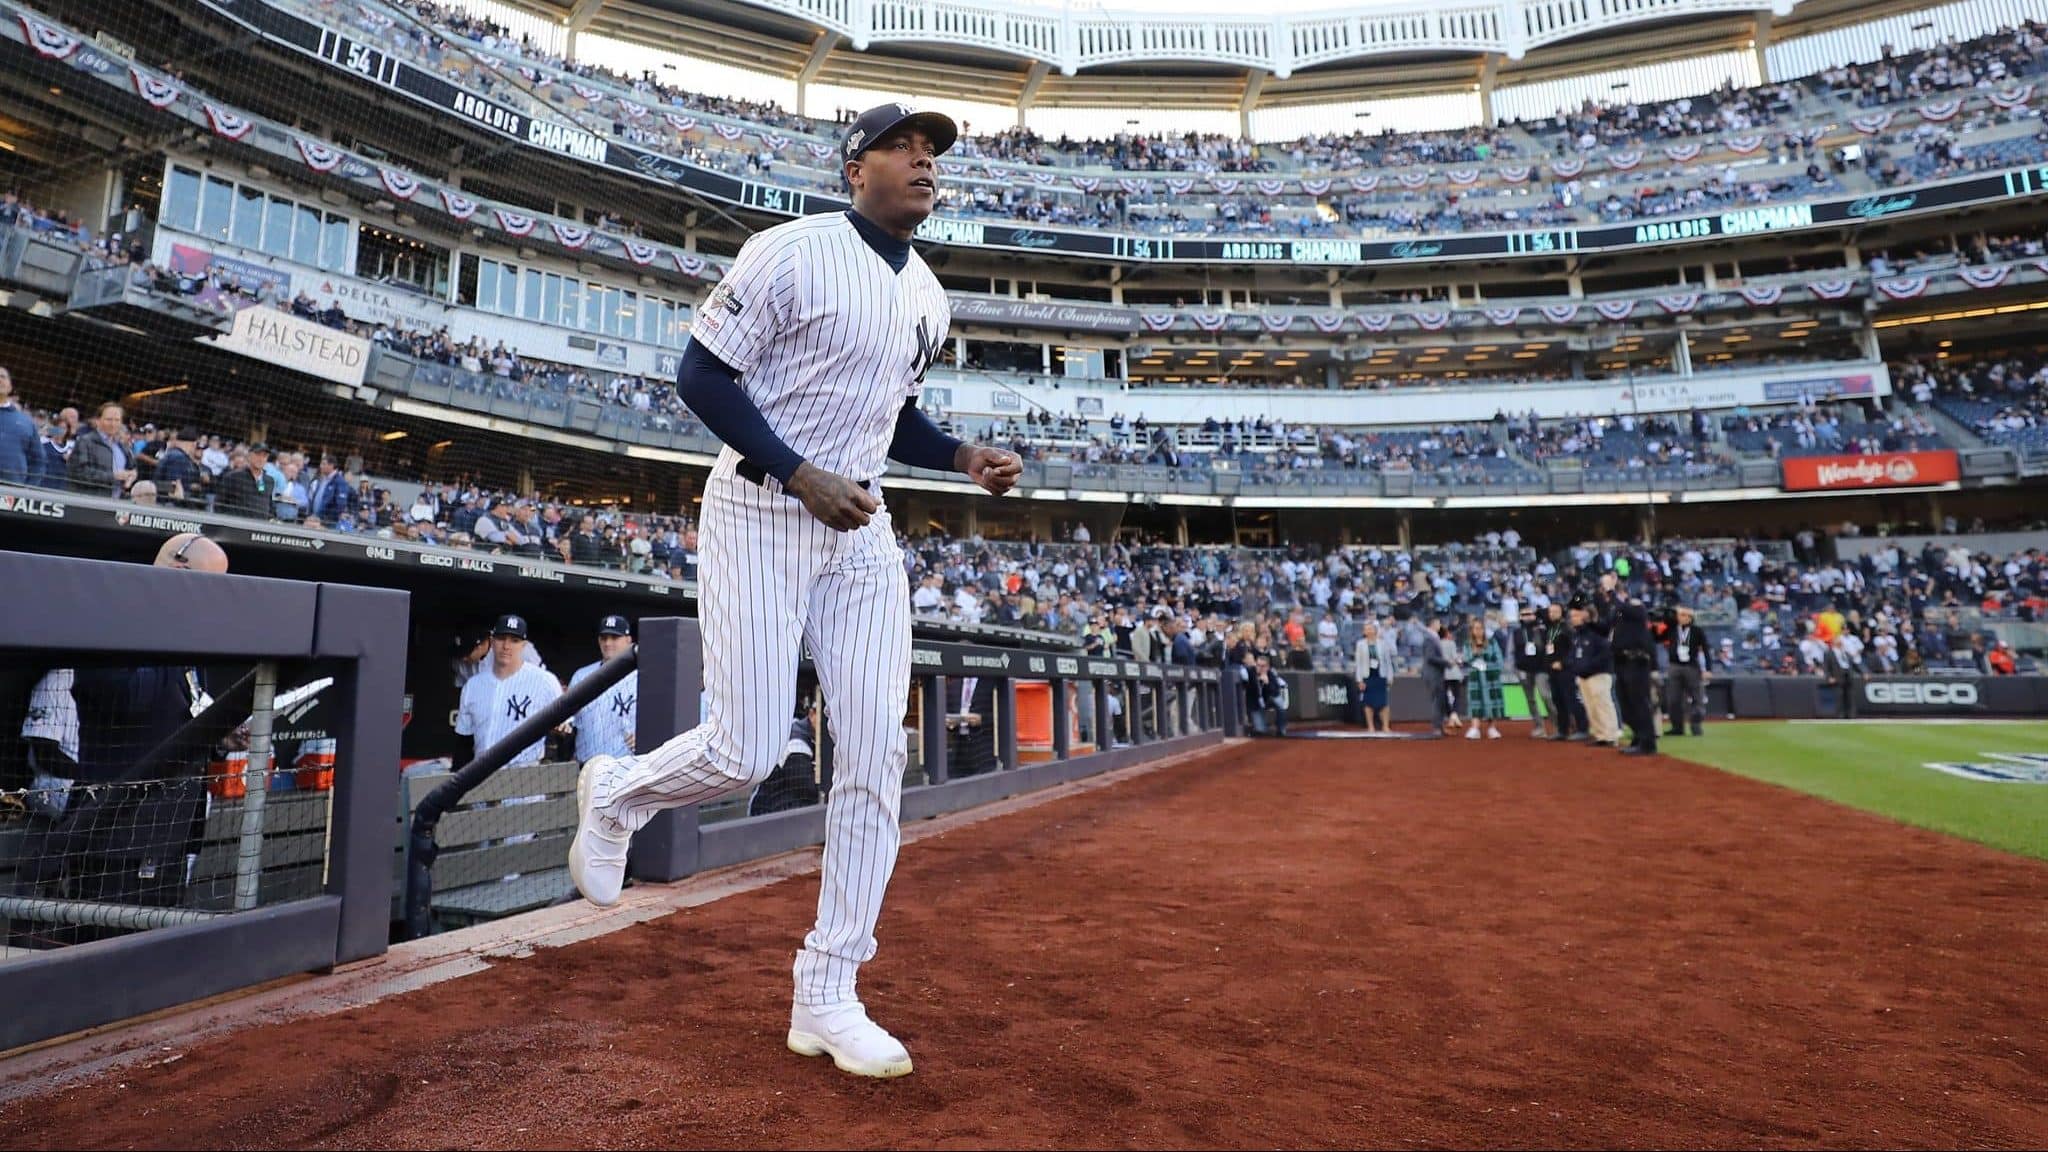 NEW YORK, NEW YORK - OCTOBER 15: Aroldis Chapman #54 of the New York Yankees takes the field as he is introduced prior to game three of the American League Championship Series against the Houston Astros at Yankee Stadium on October 15, 2019 in New York City.